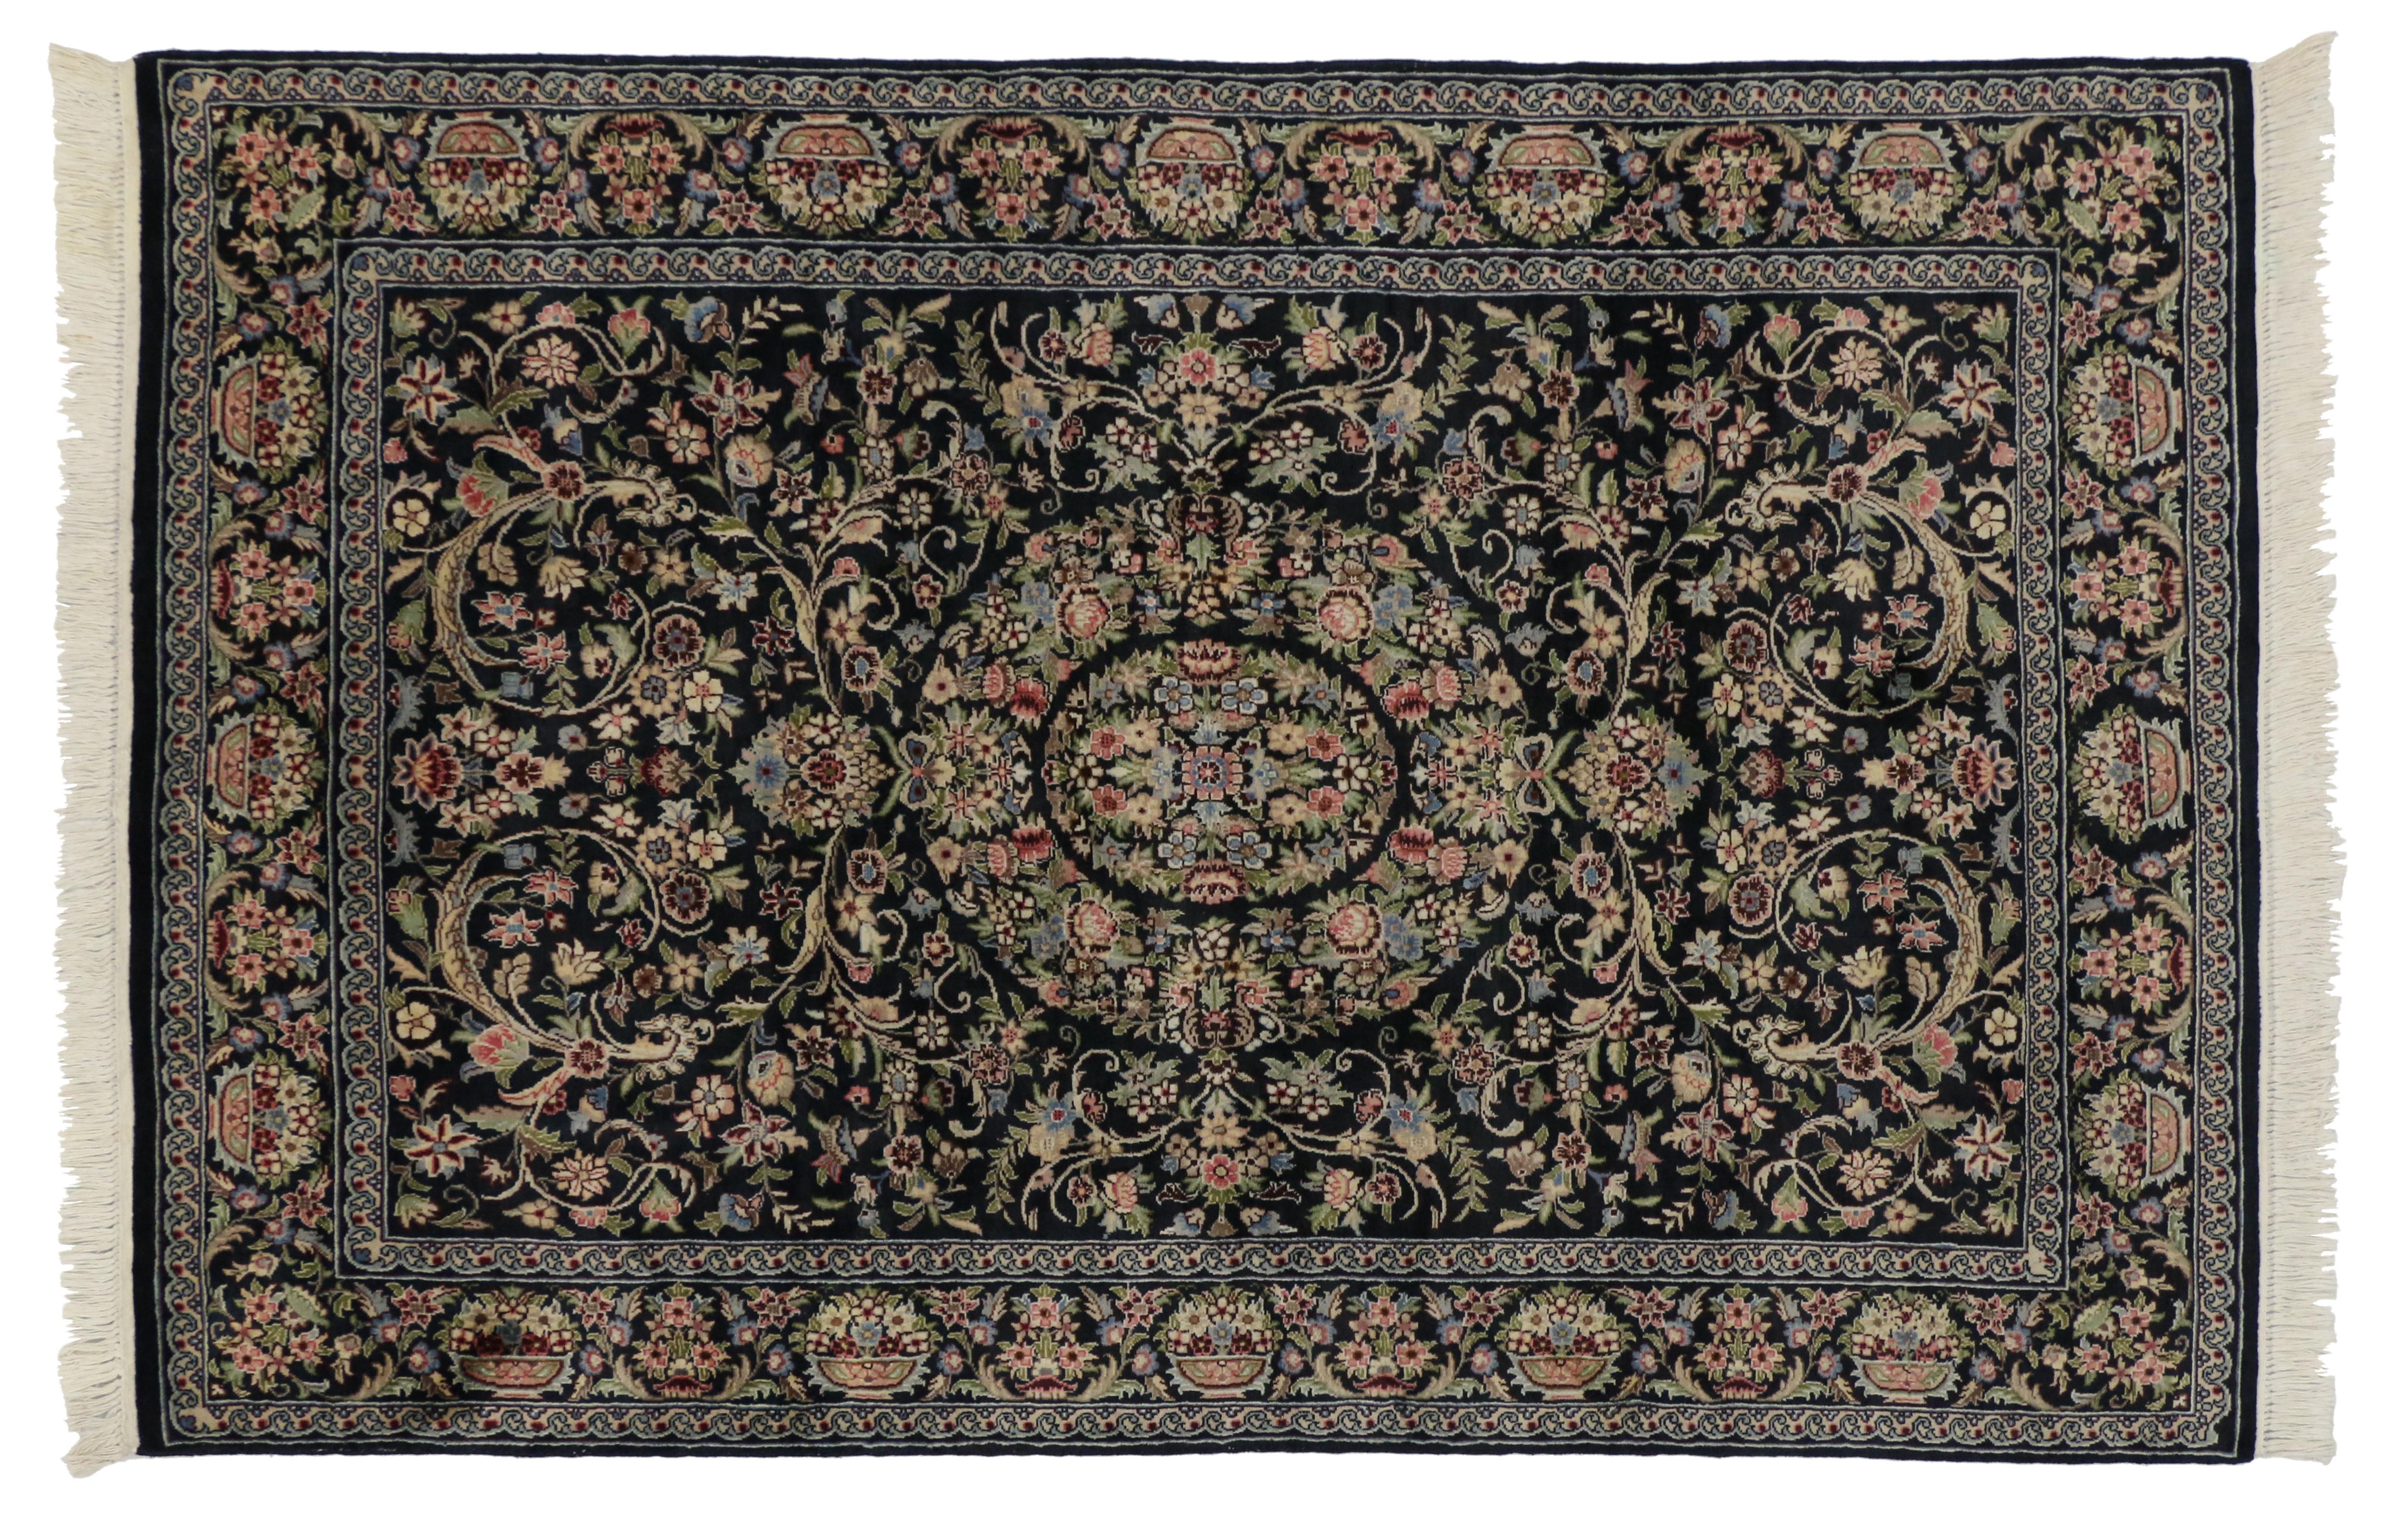 Hand-Knotted Vintage Aubusson Garden Area Rug with Baroque Floral Chintz Style